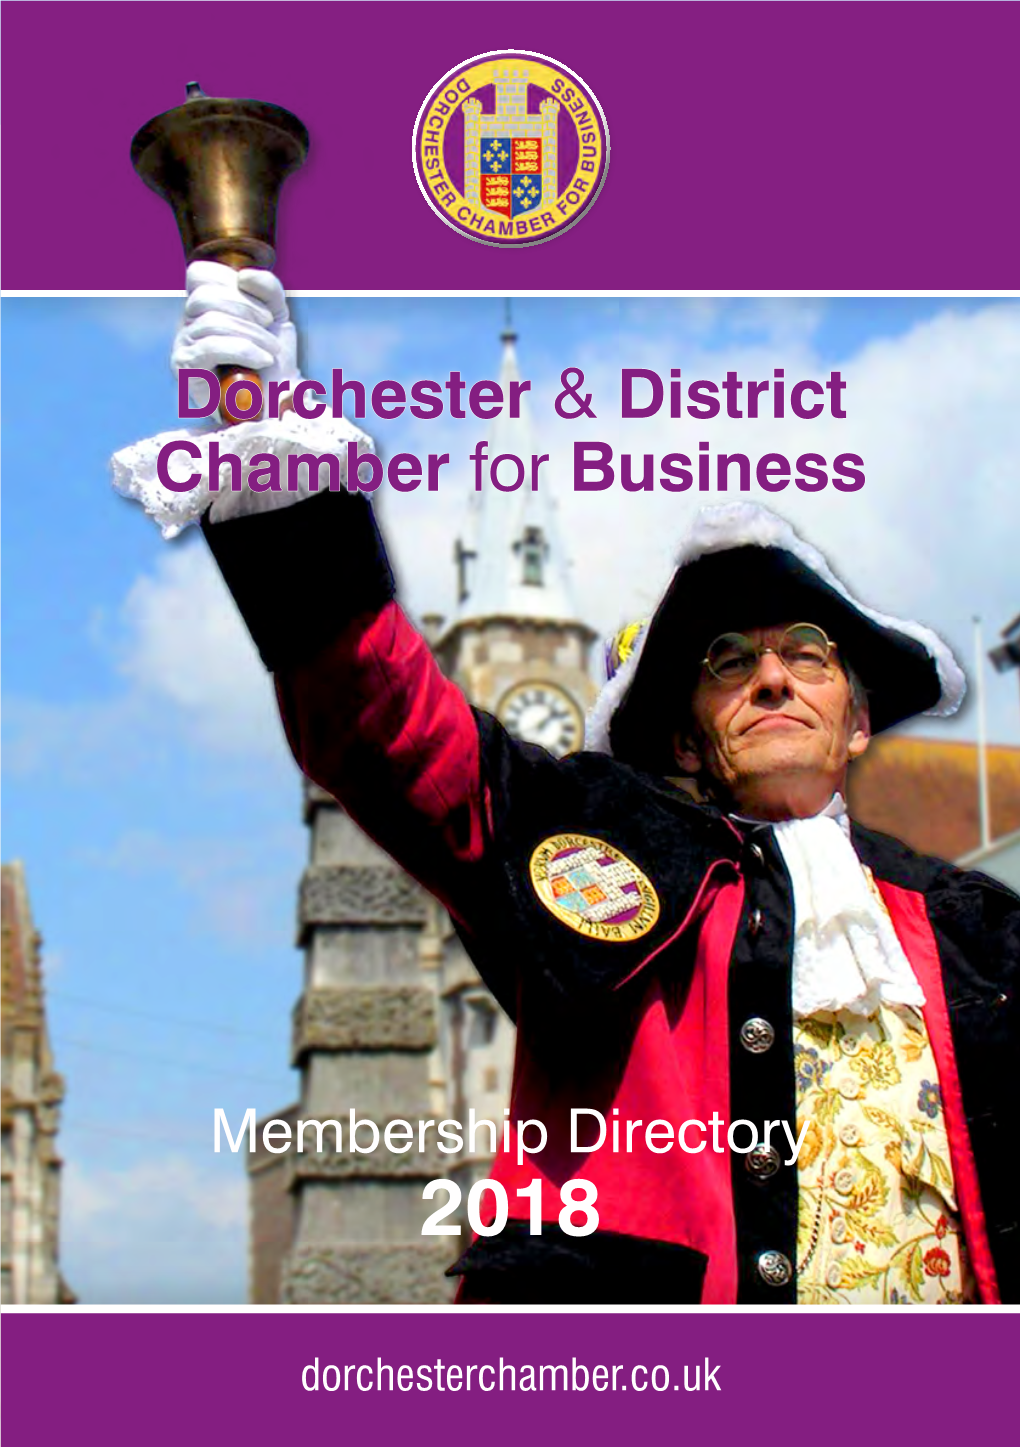 Dorchester & District Chamber for Business